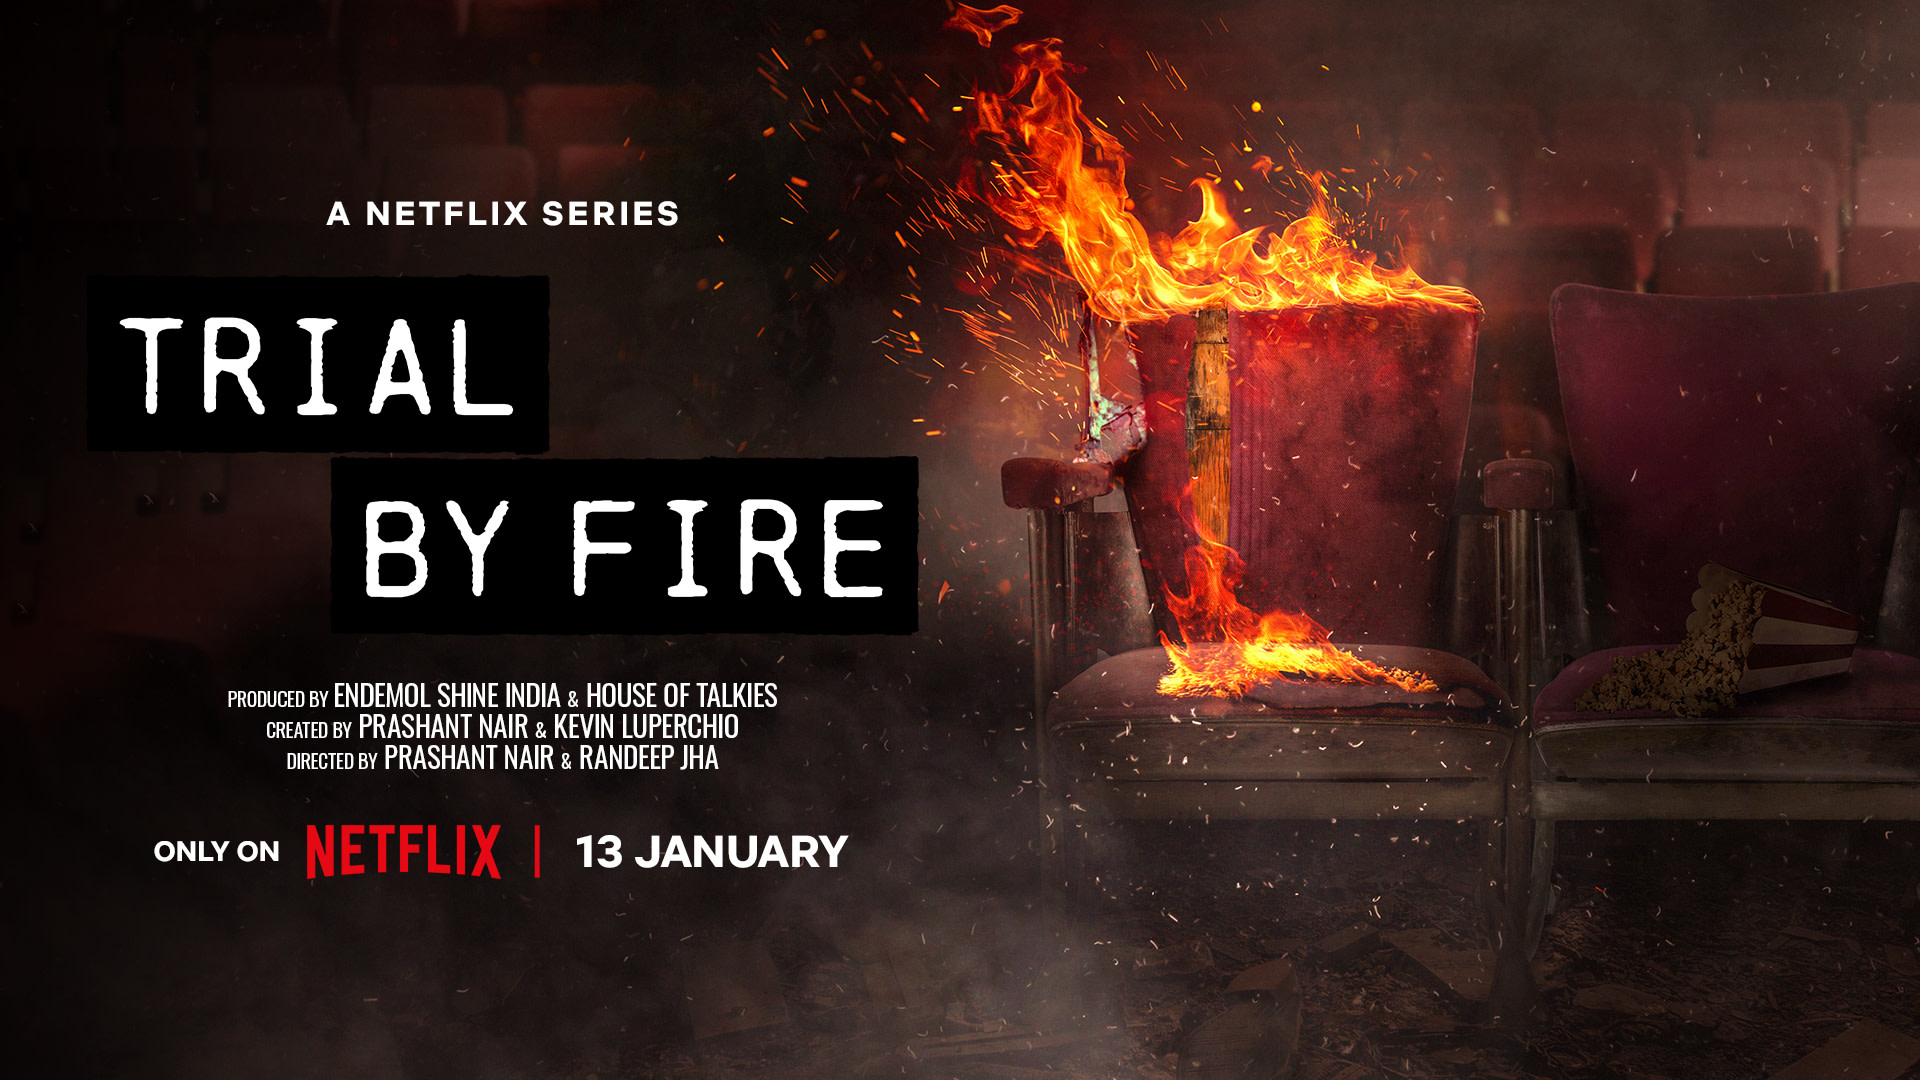 Netflix Announces Limited Series ‘Trial By Fire’ to Release January 13